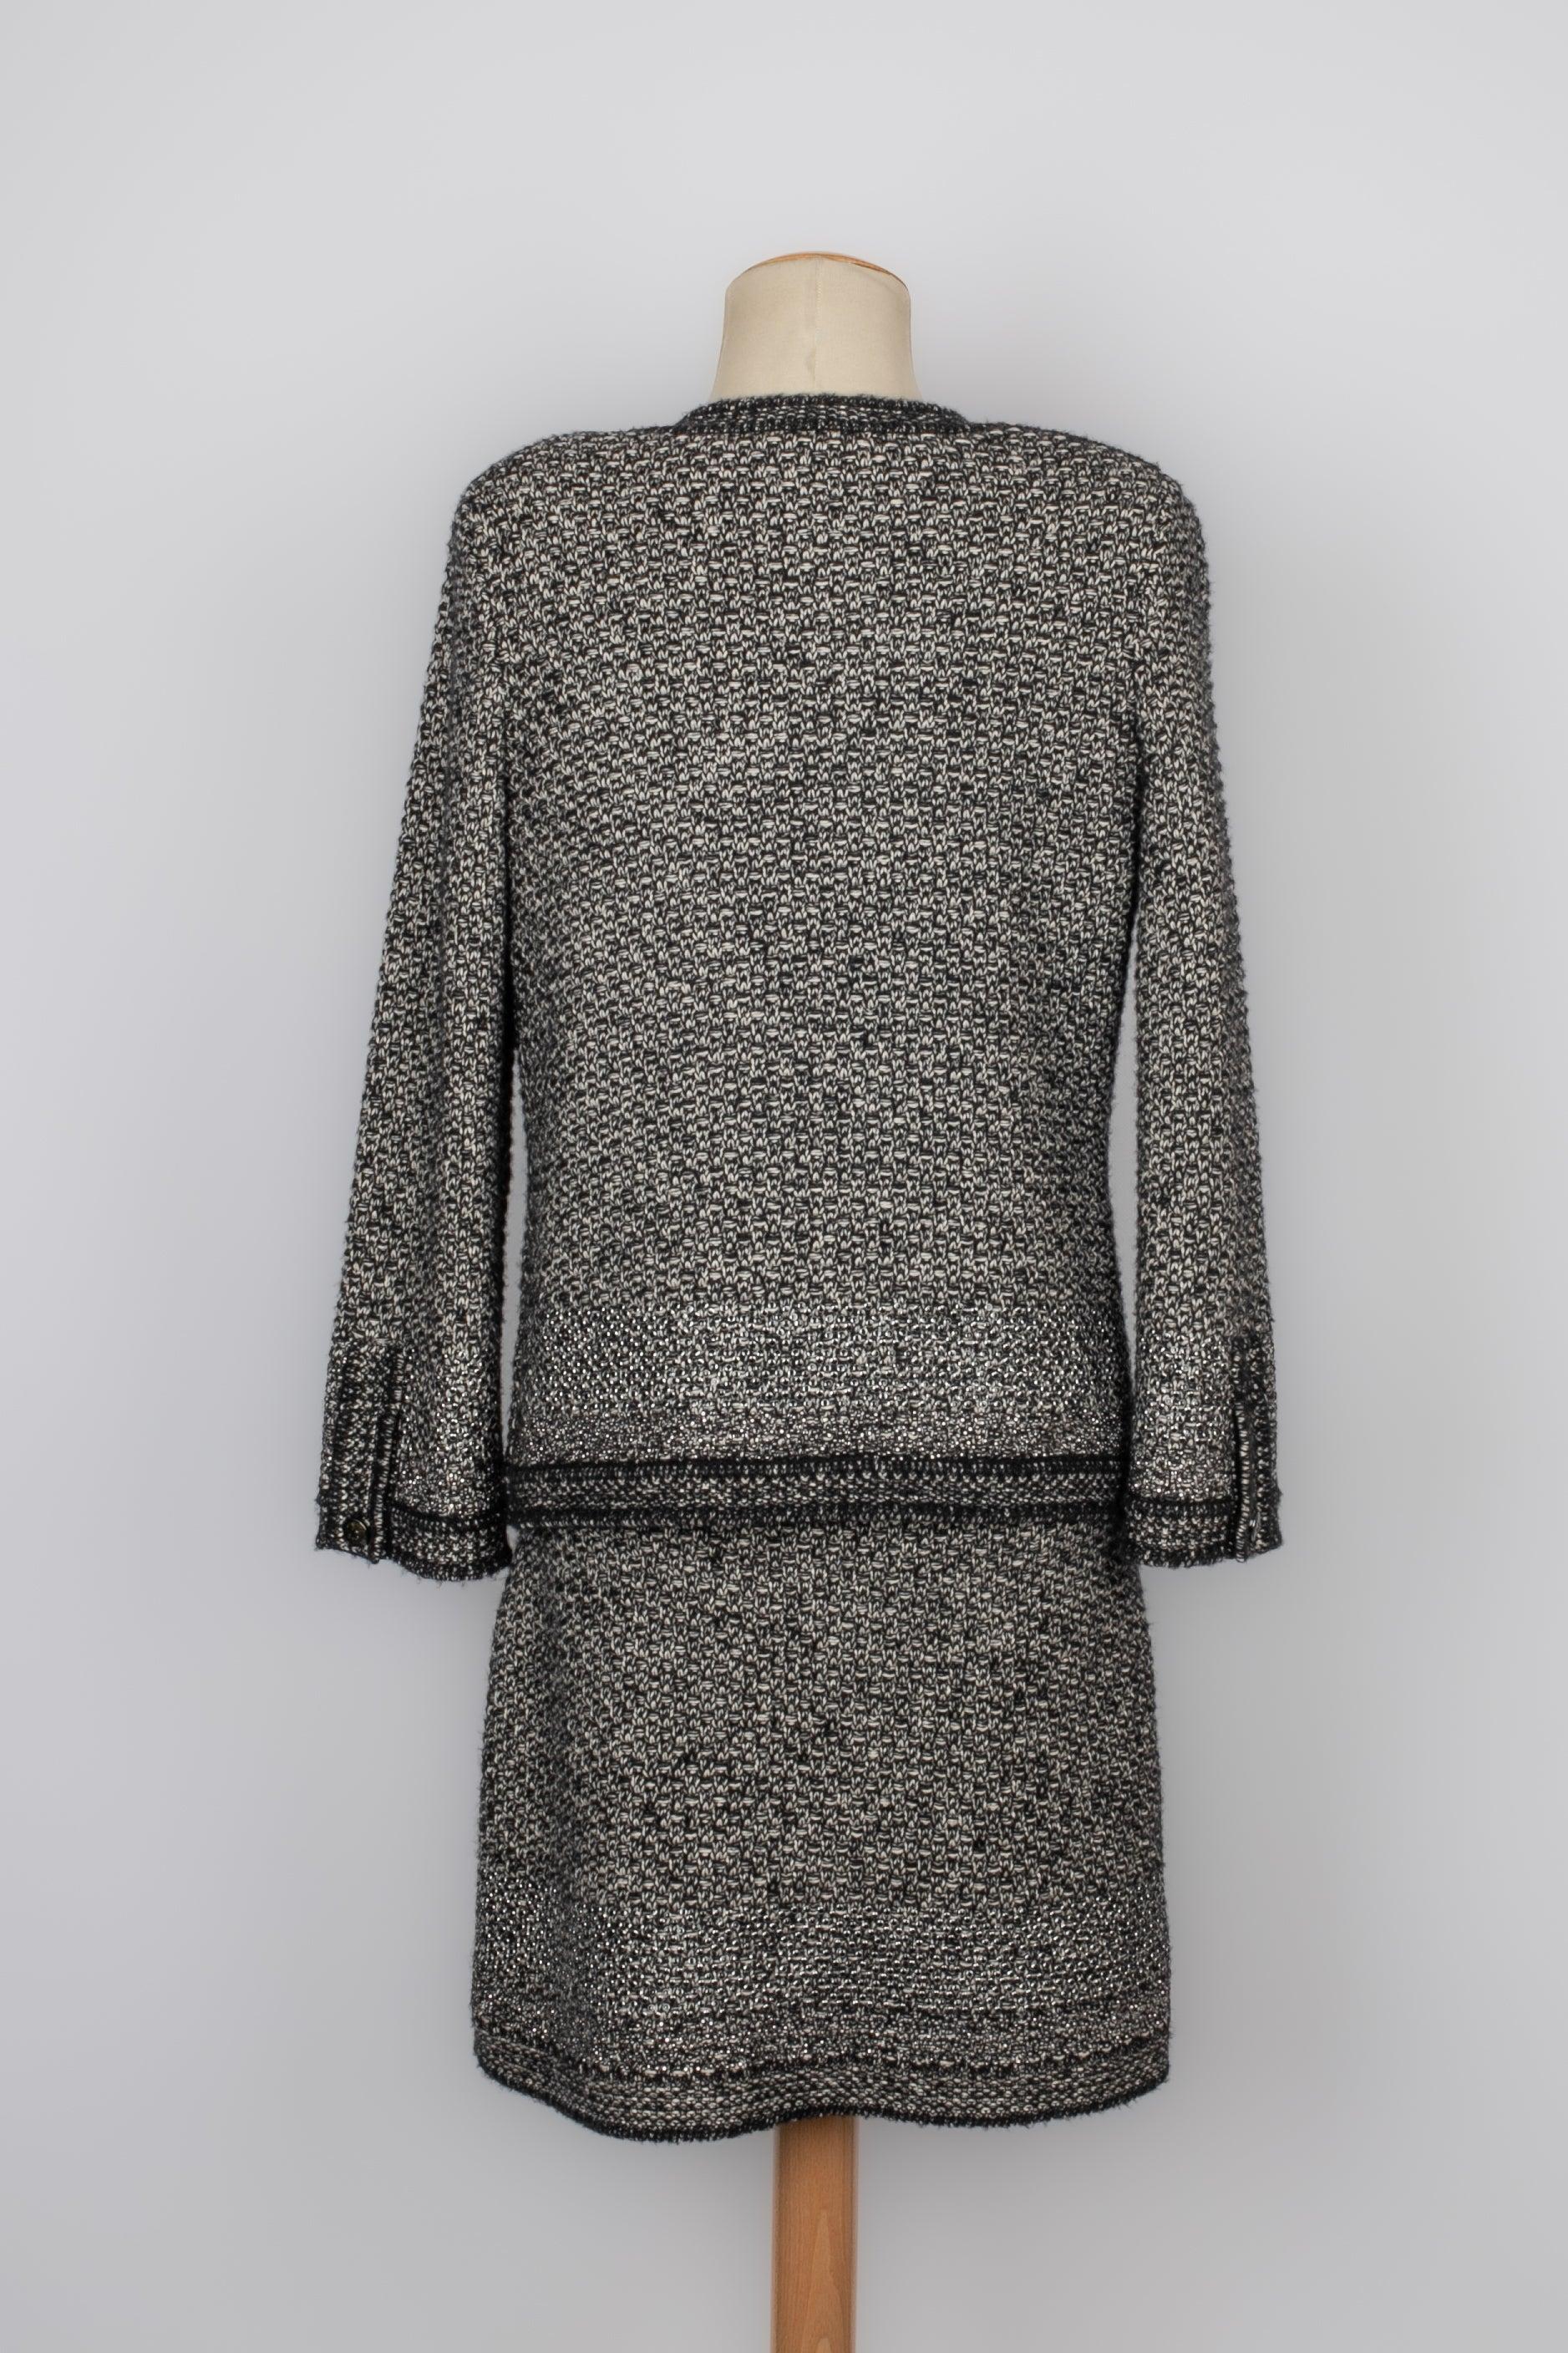 Chanel Set of Cardigan and Dress In Excellent Condition For Sale In SAINT-OUEN-SUR-SEINE, FR